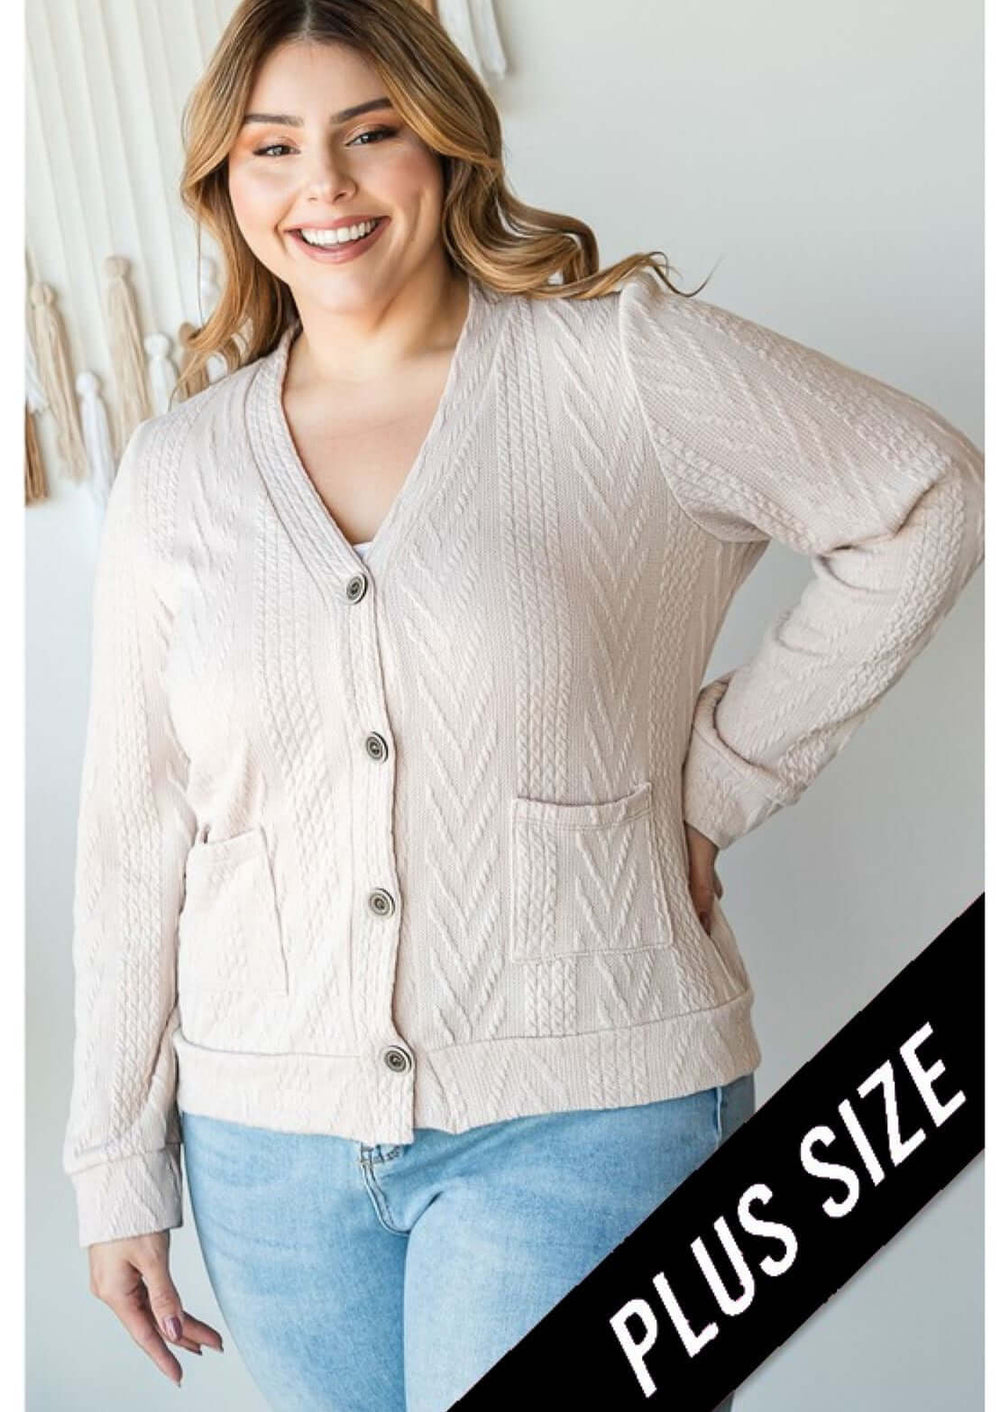 Ladies' Plus Size Cable Knit Classy Casual Button Down Cardigan in Cream  | Made in USA | Classy Cozy Cool Women's Made in America Clothing Boutique